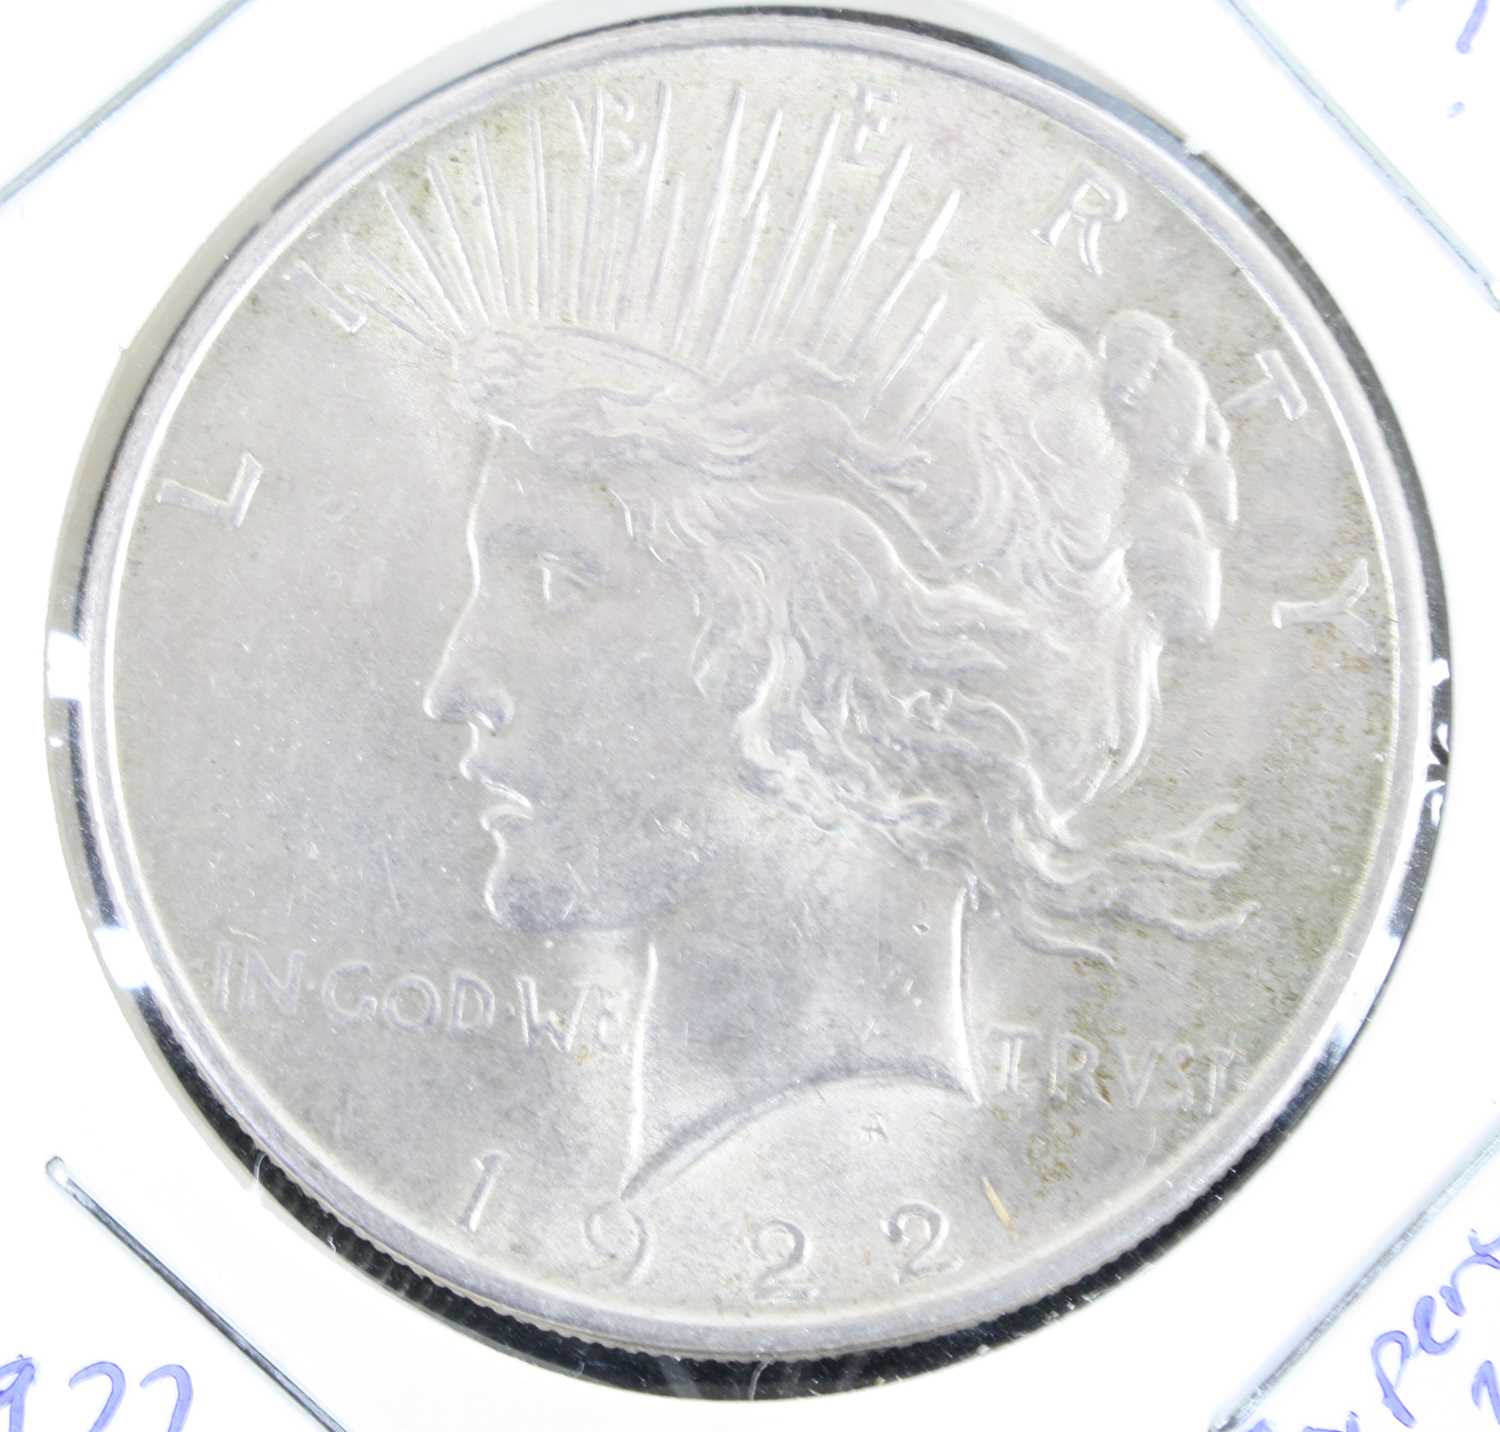 United States of America, 1922 Peace dollar, obv: Liberty bust left above date, rev: eagle - Image 3 of 4